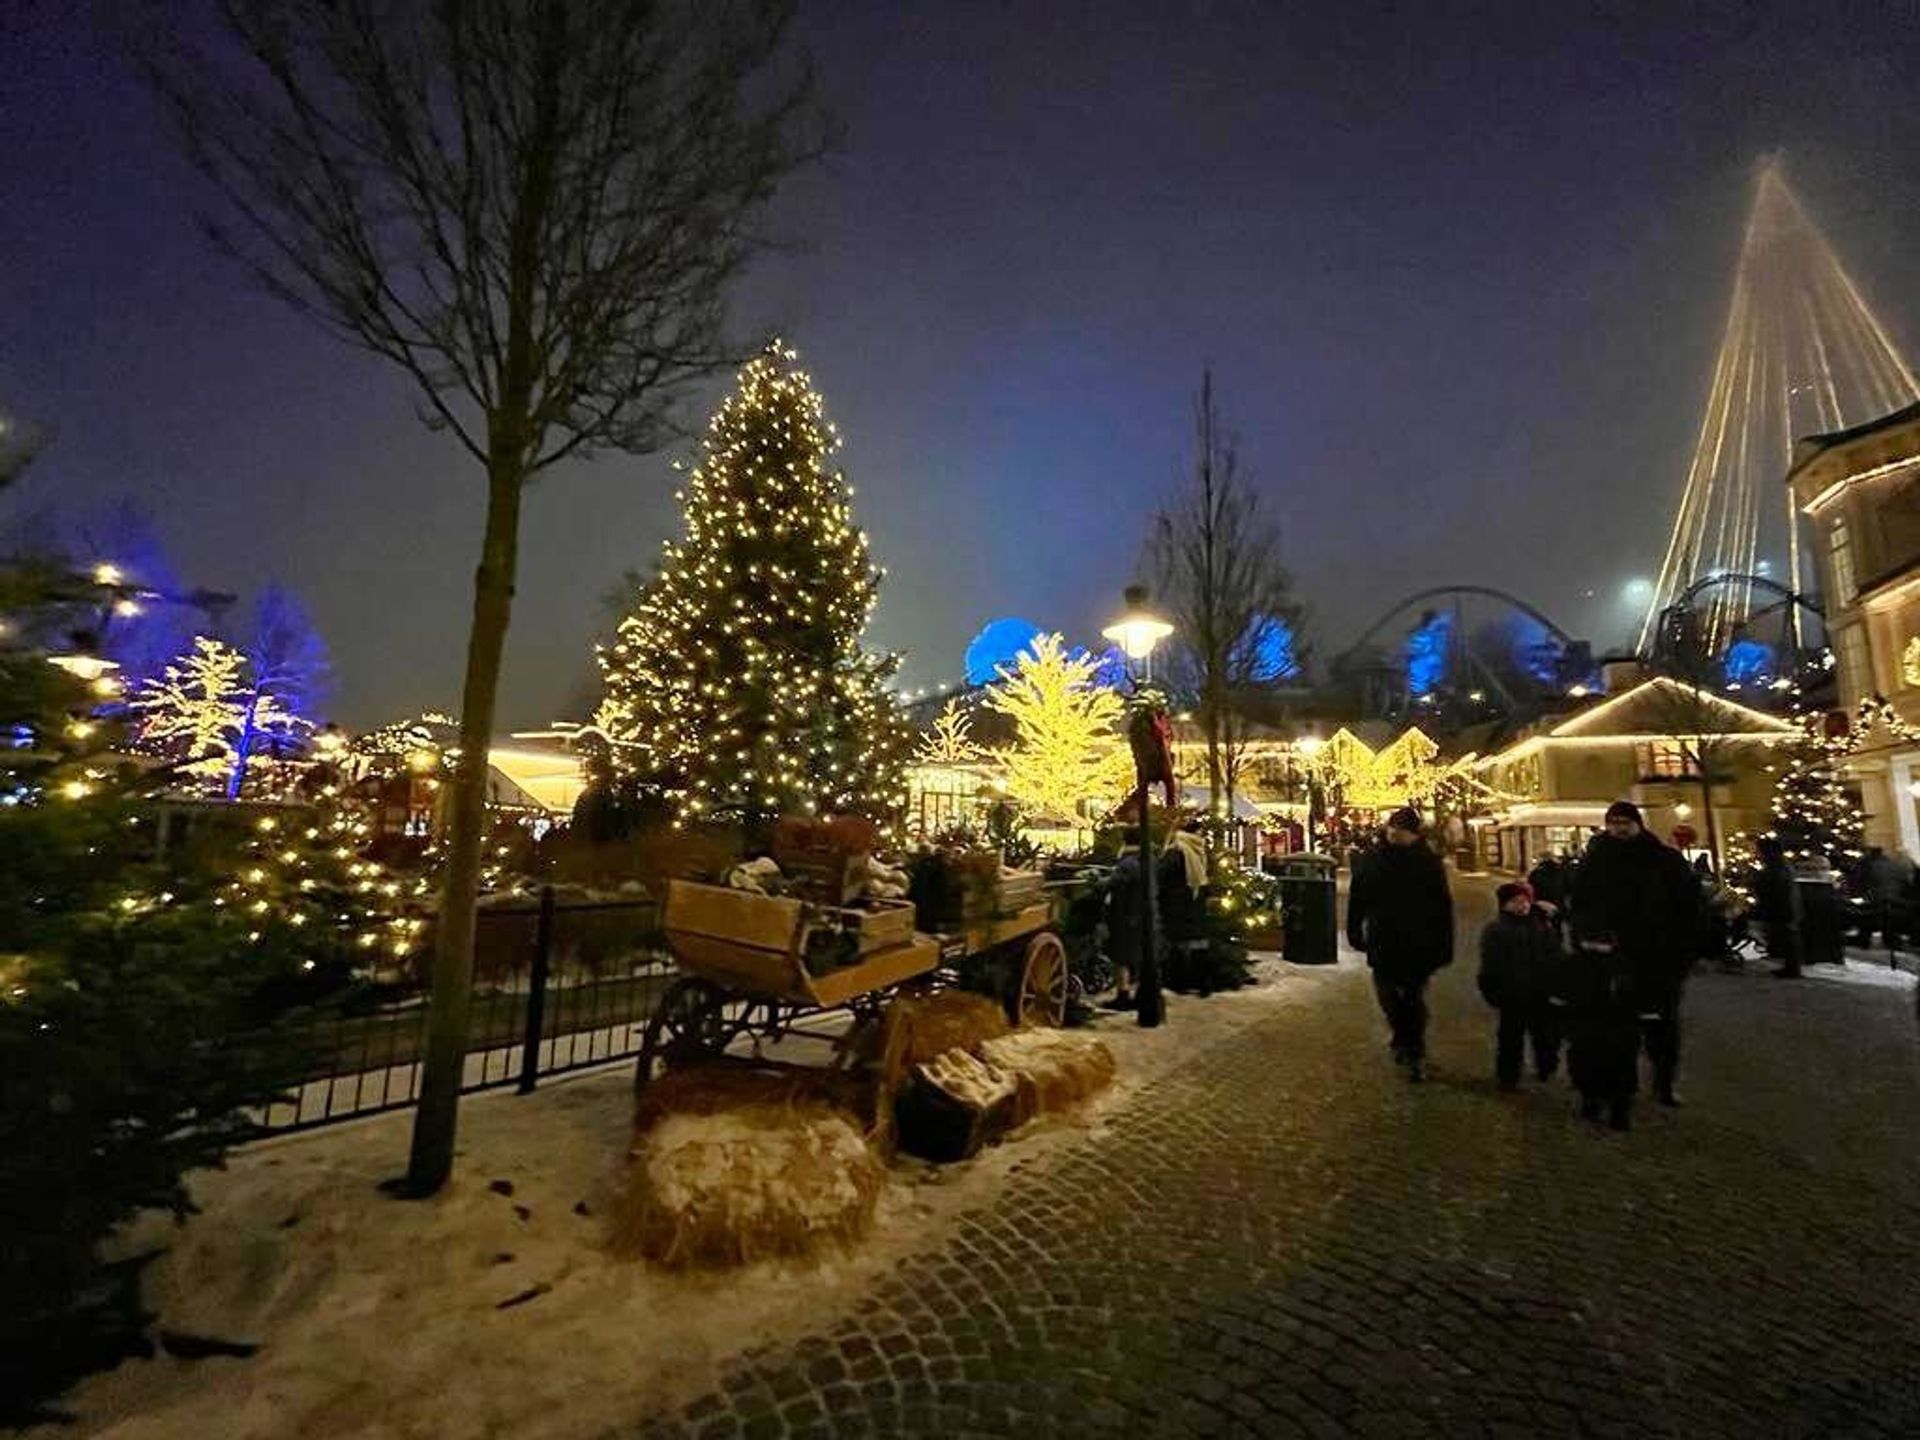 A view from inside Liseberg park, featuring Christmas decorations.